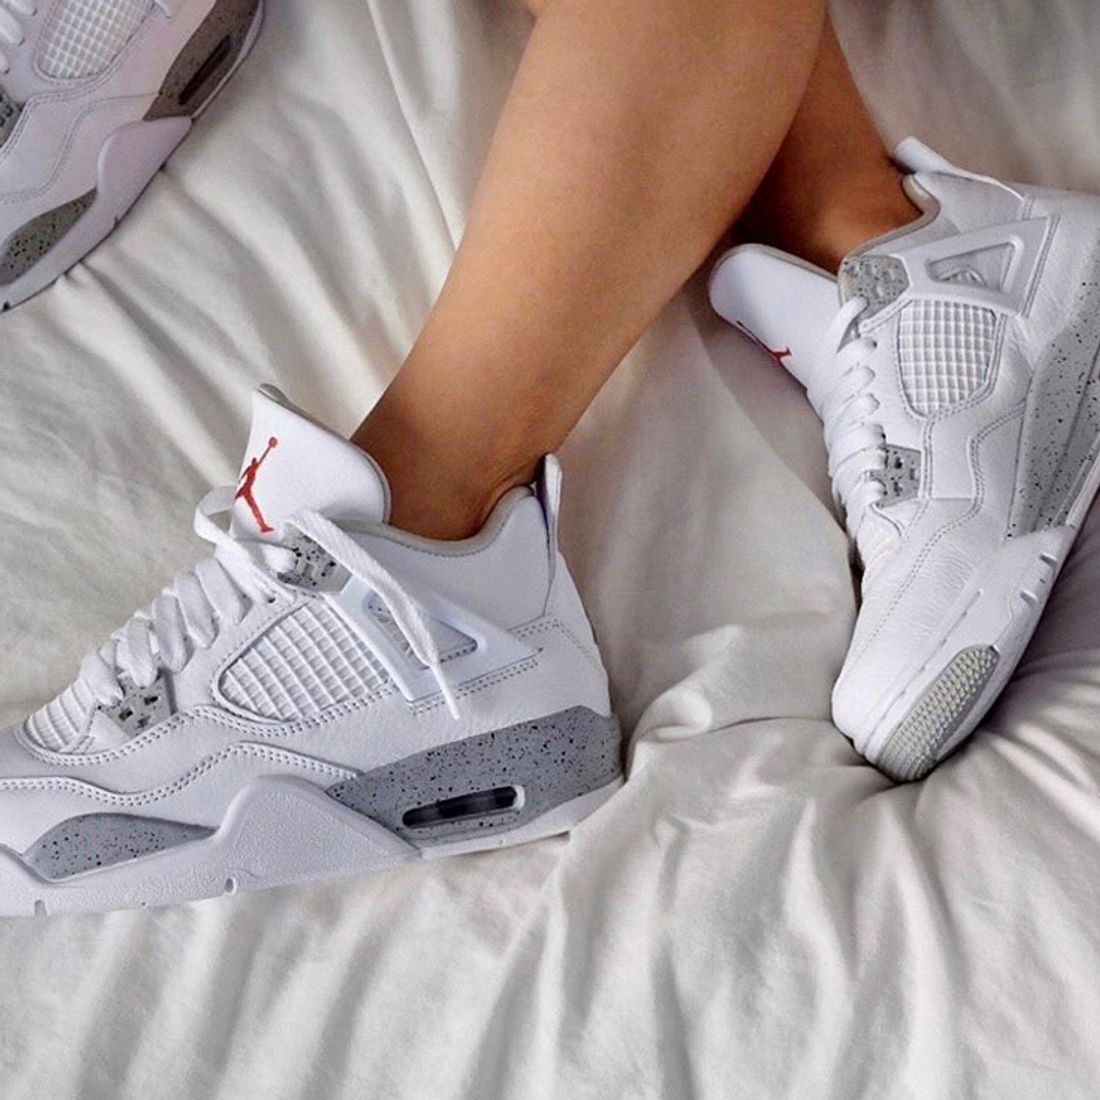 Here's How People Are Styling the Air Jordan 4 'Tech White' AKA